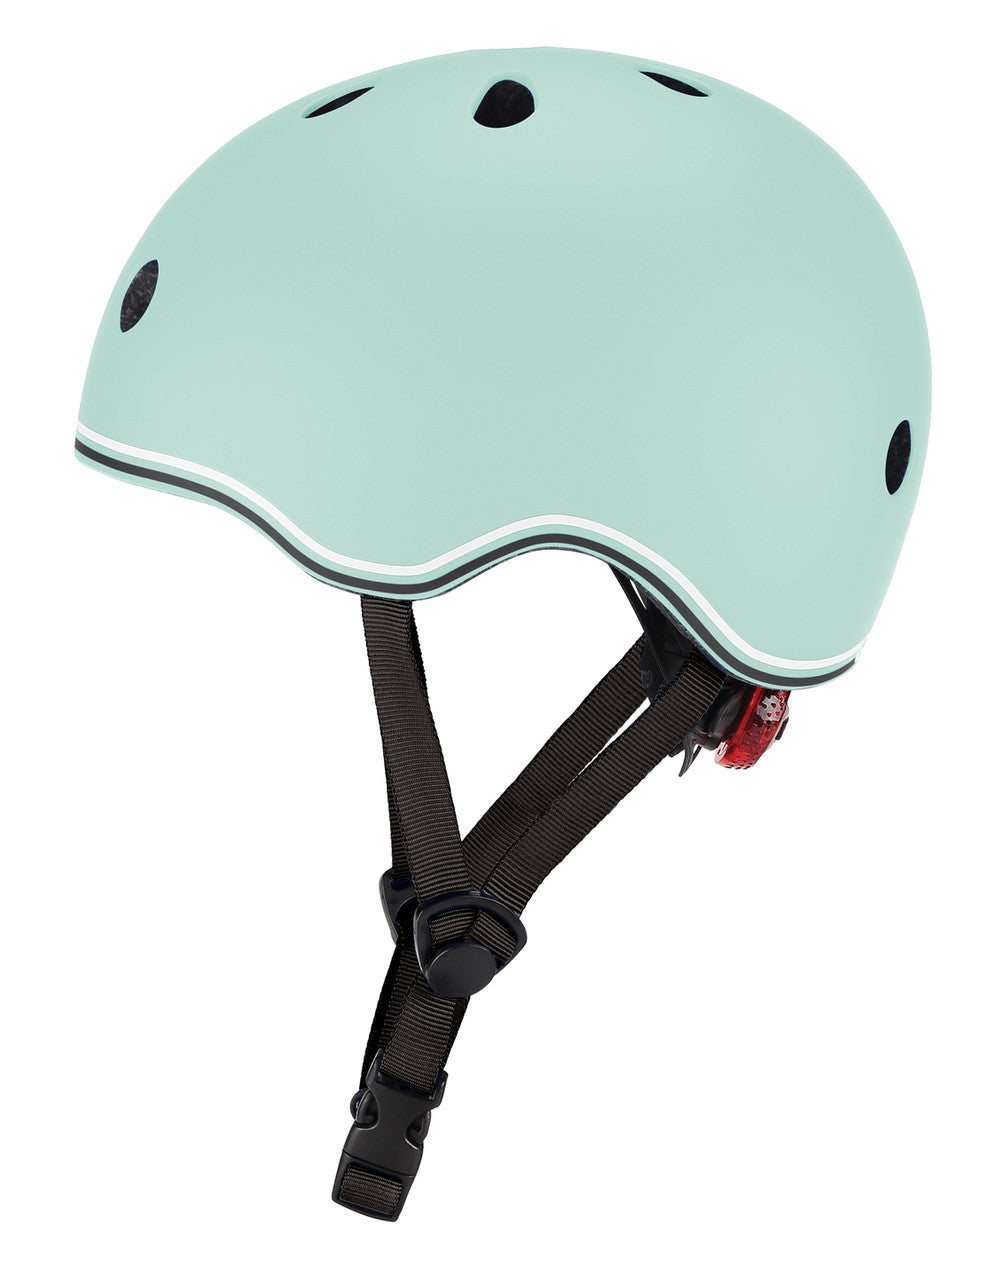 Globber Helmet for Toddlers - Mint - Extra Small (46-51cm)